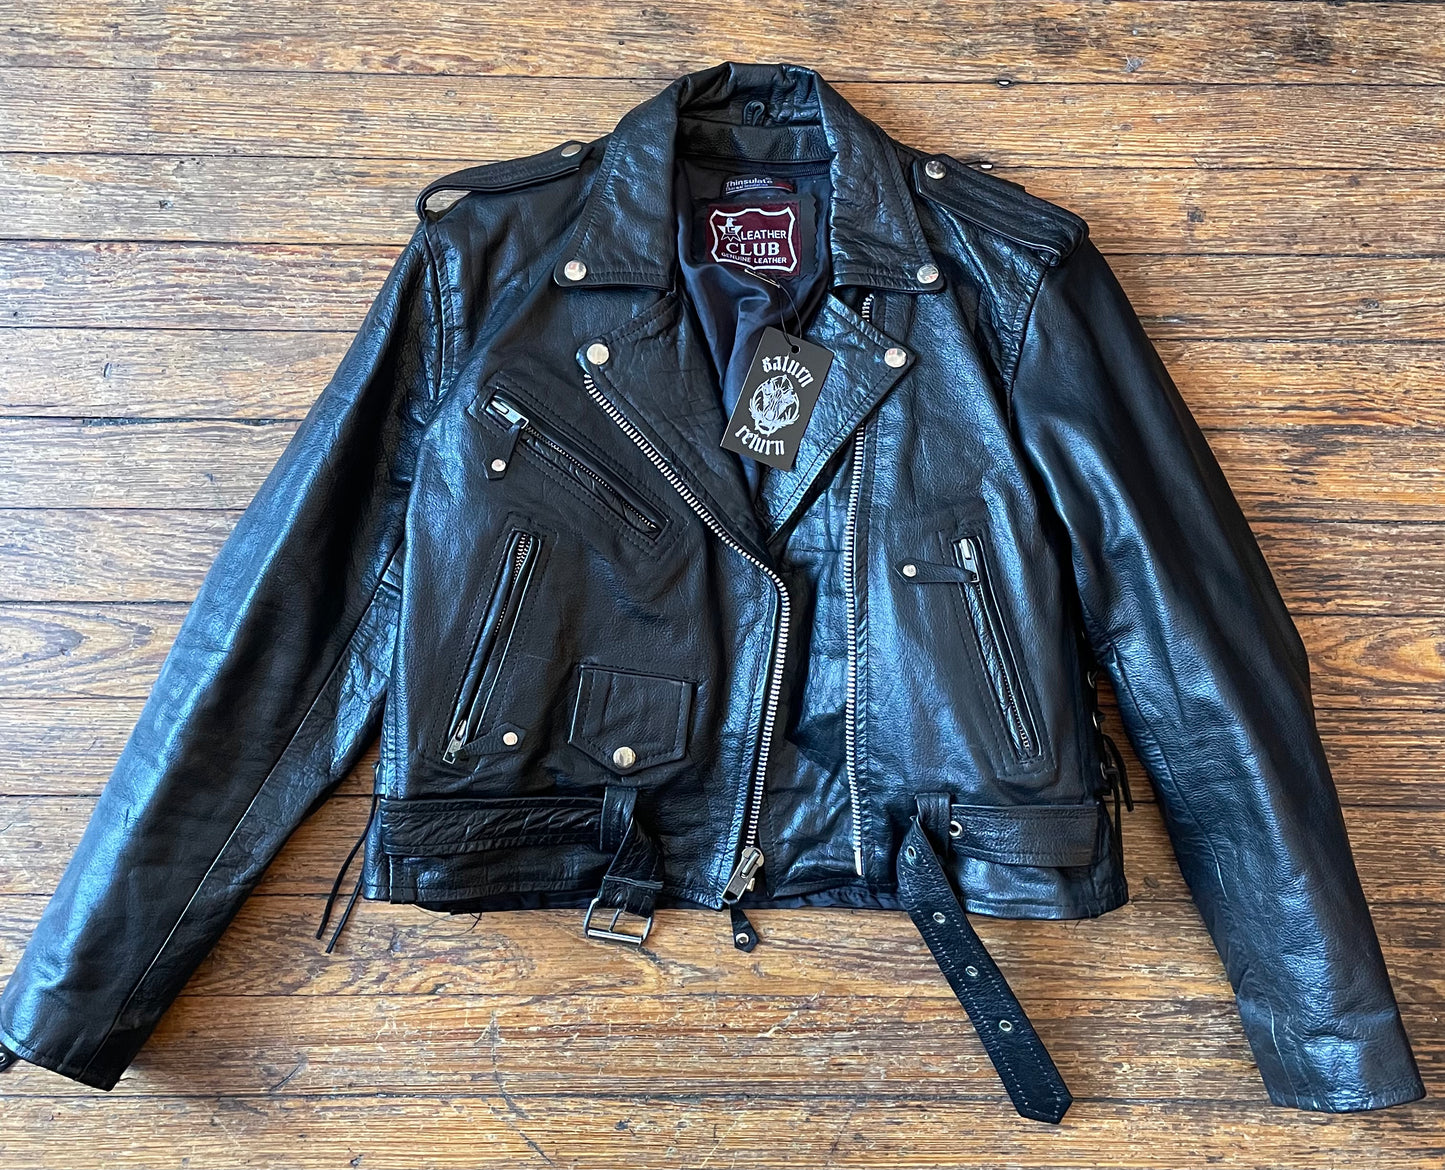 Vintage Leather Club Classic Motorcycle Jacket